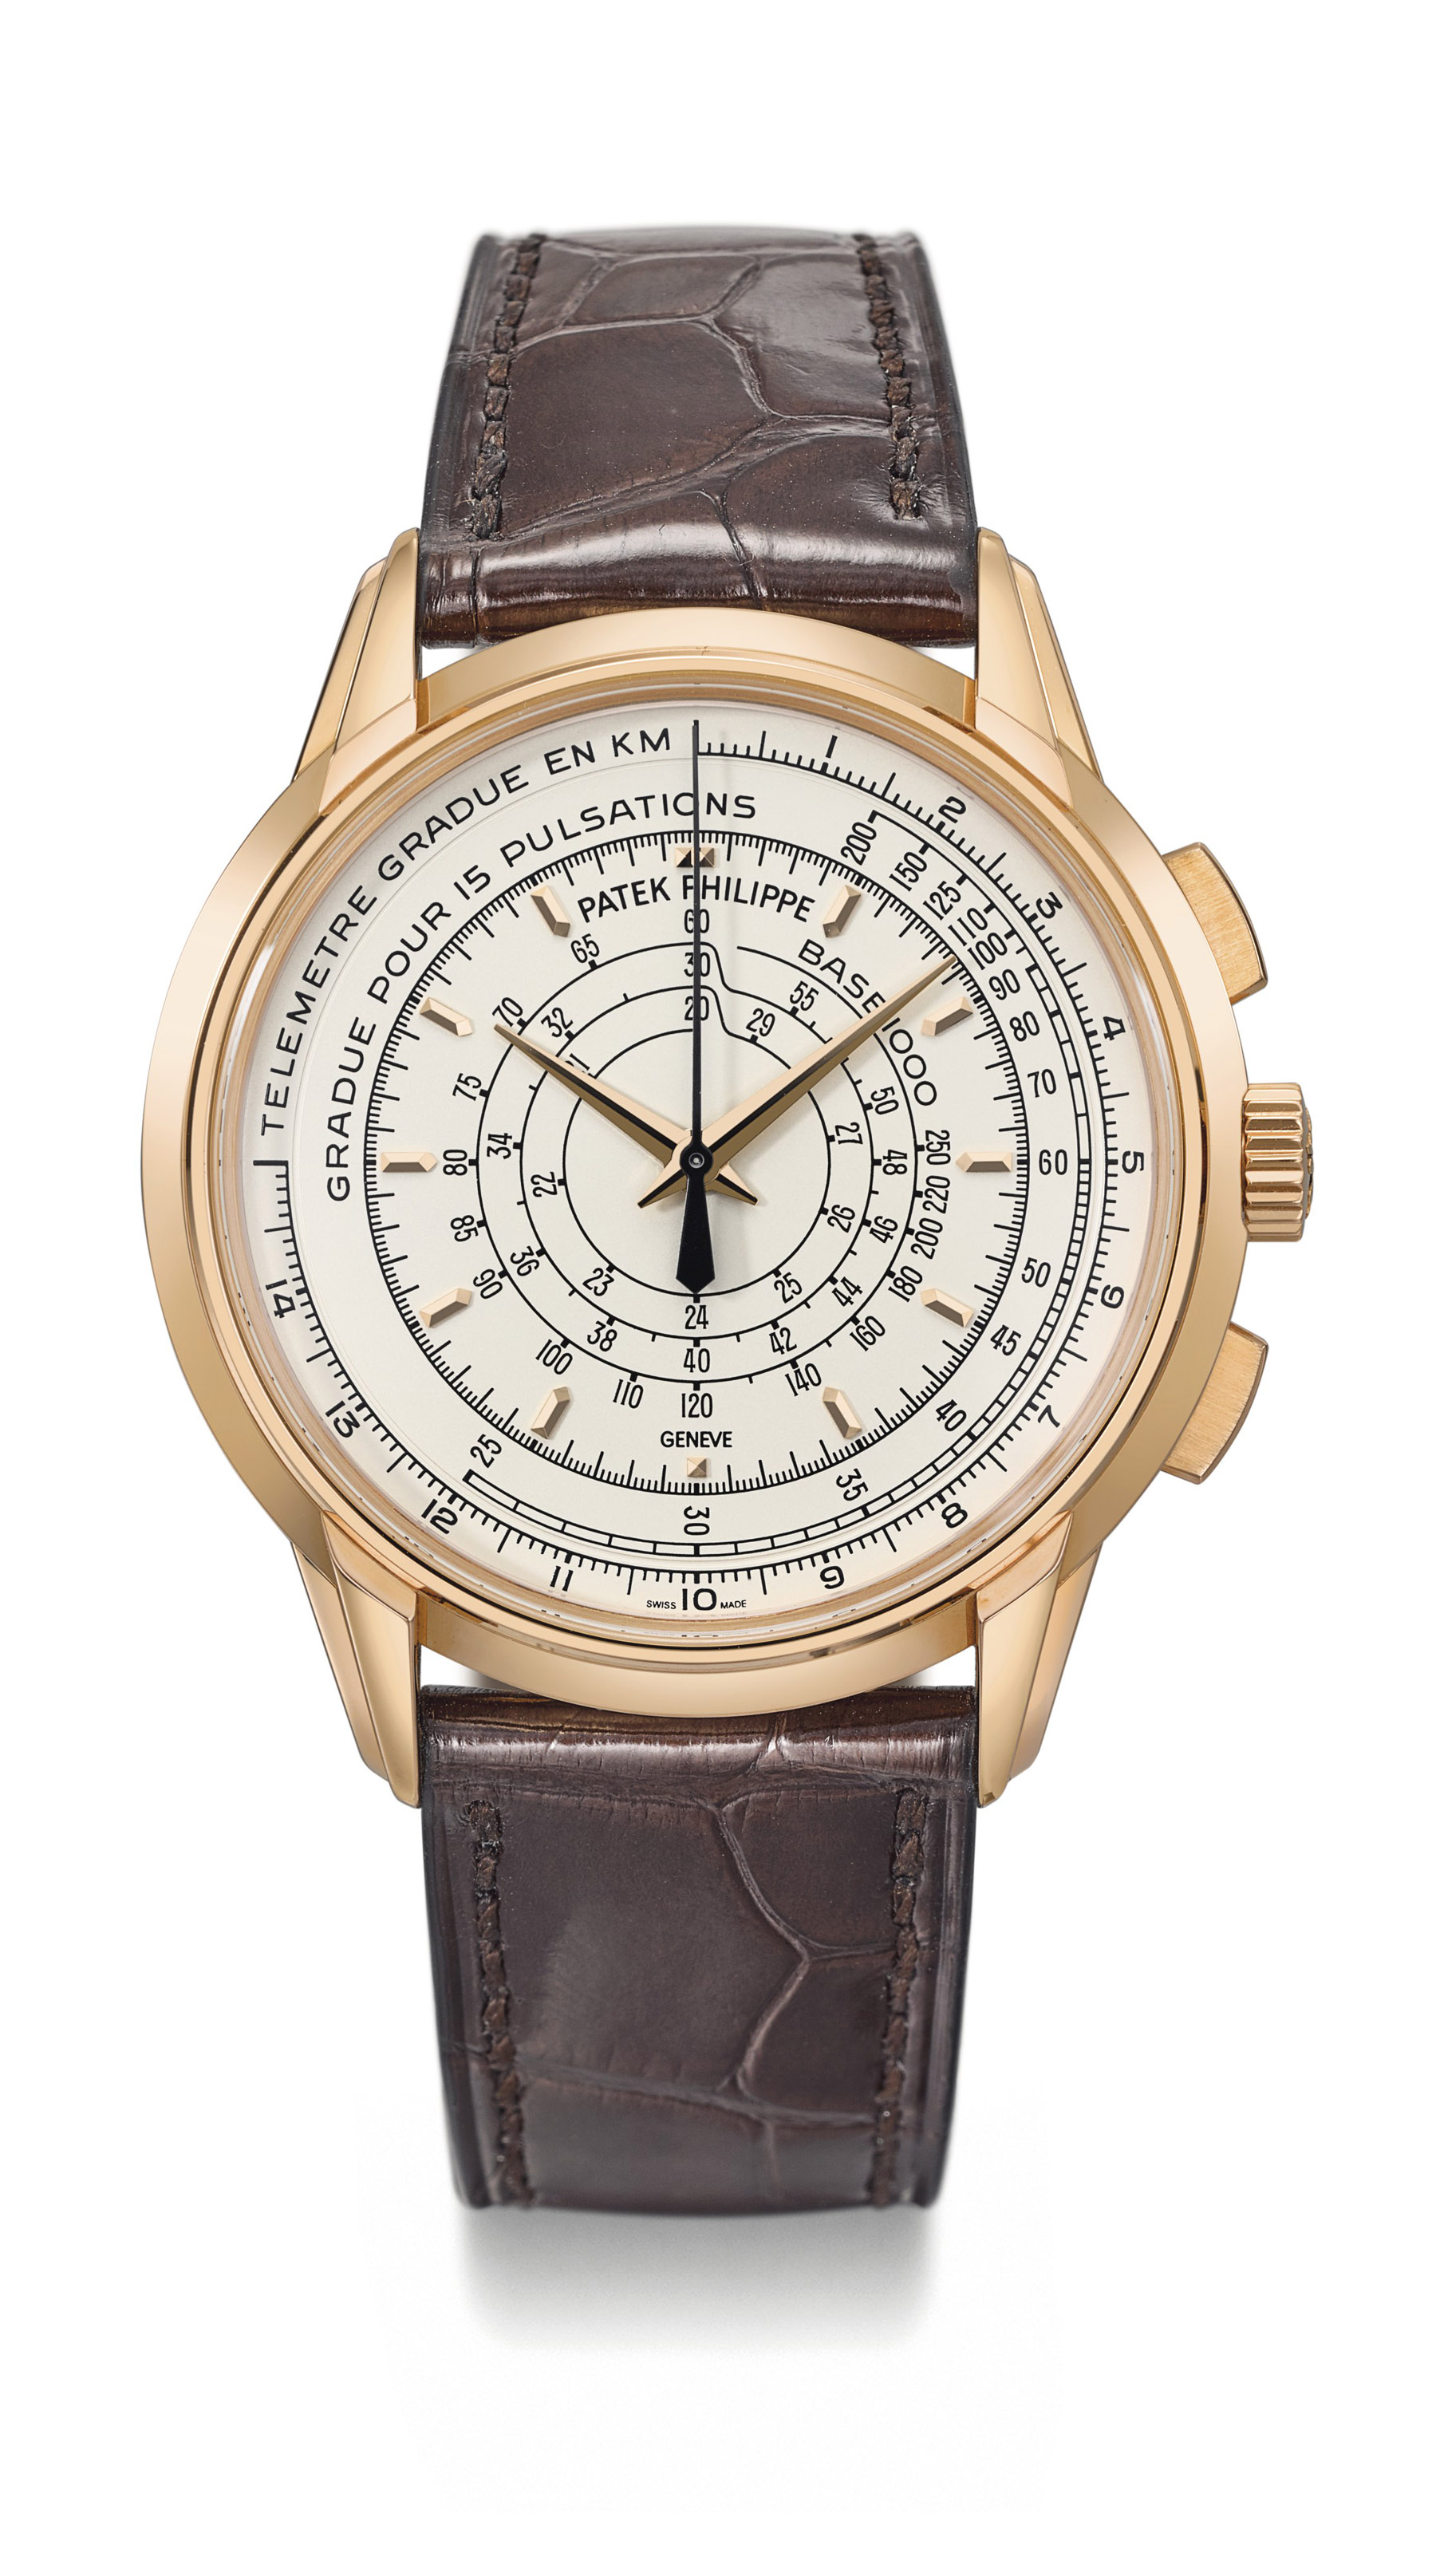 Patek Philippe. A fine and rare 18K pink gold limited edition automatic multi-scale chronograph wristwatch made to commemorate the 175th anniversary of Patek Philippe in 2014 Ref. 5975R, manufactured in 2014 Estimate CHF 50,000 – 80,000